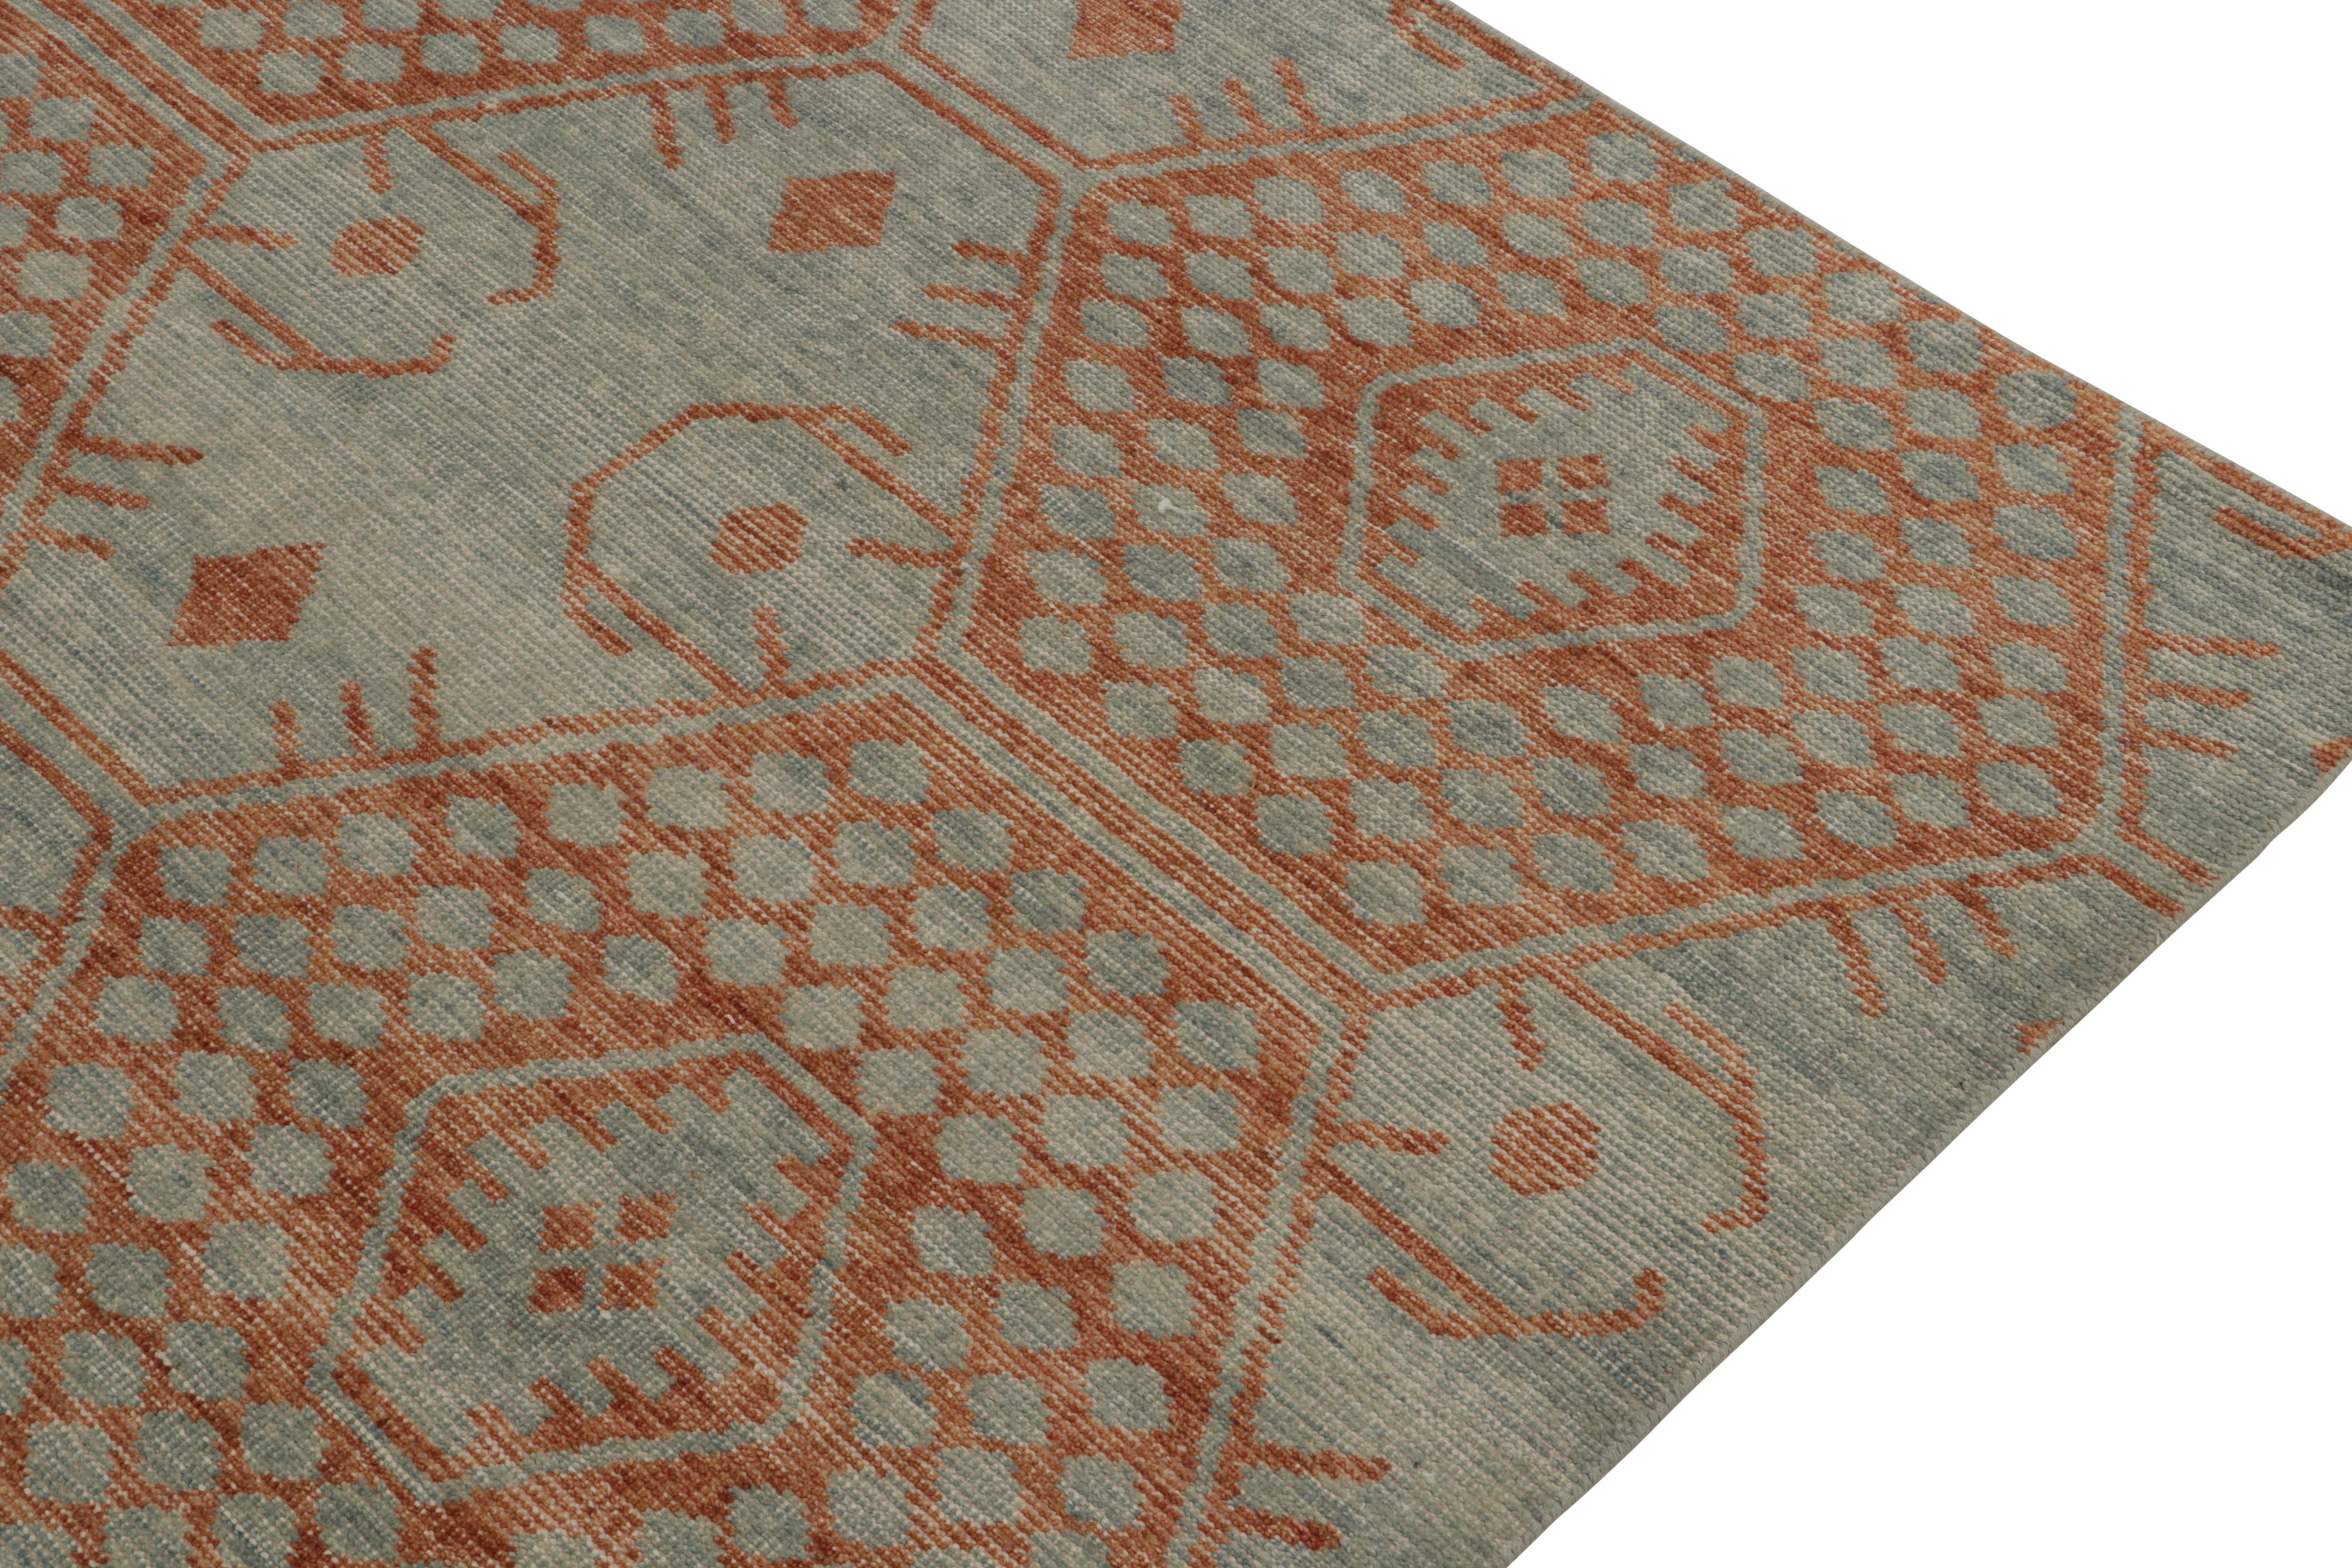 Hand-Knotted Rug & Kilim’s Distressed Style Rug in Blue and Rust Orange Geometric Patterns For Sale